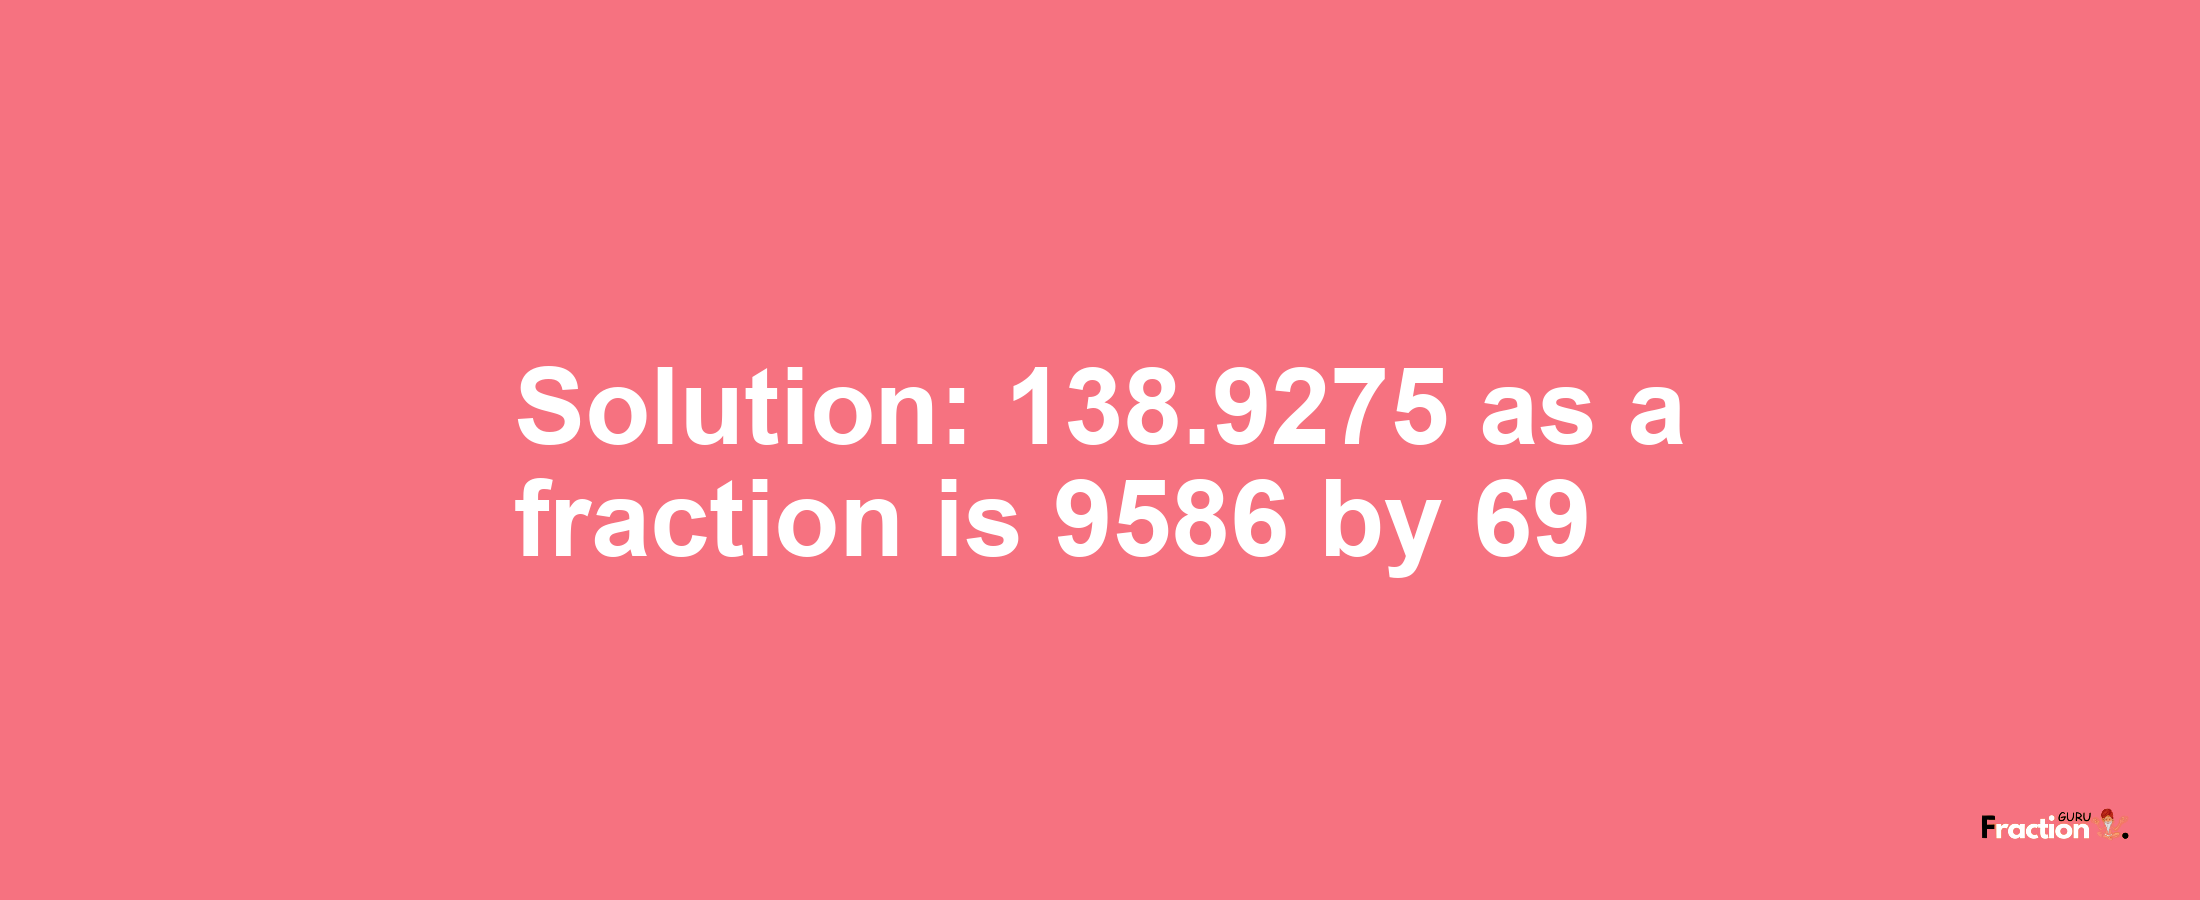 Solution:138.9275 as a fraction is 9586/69